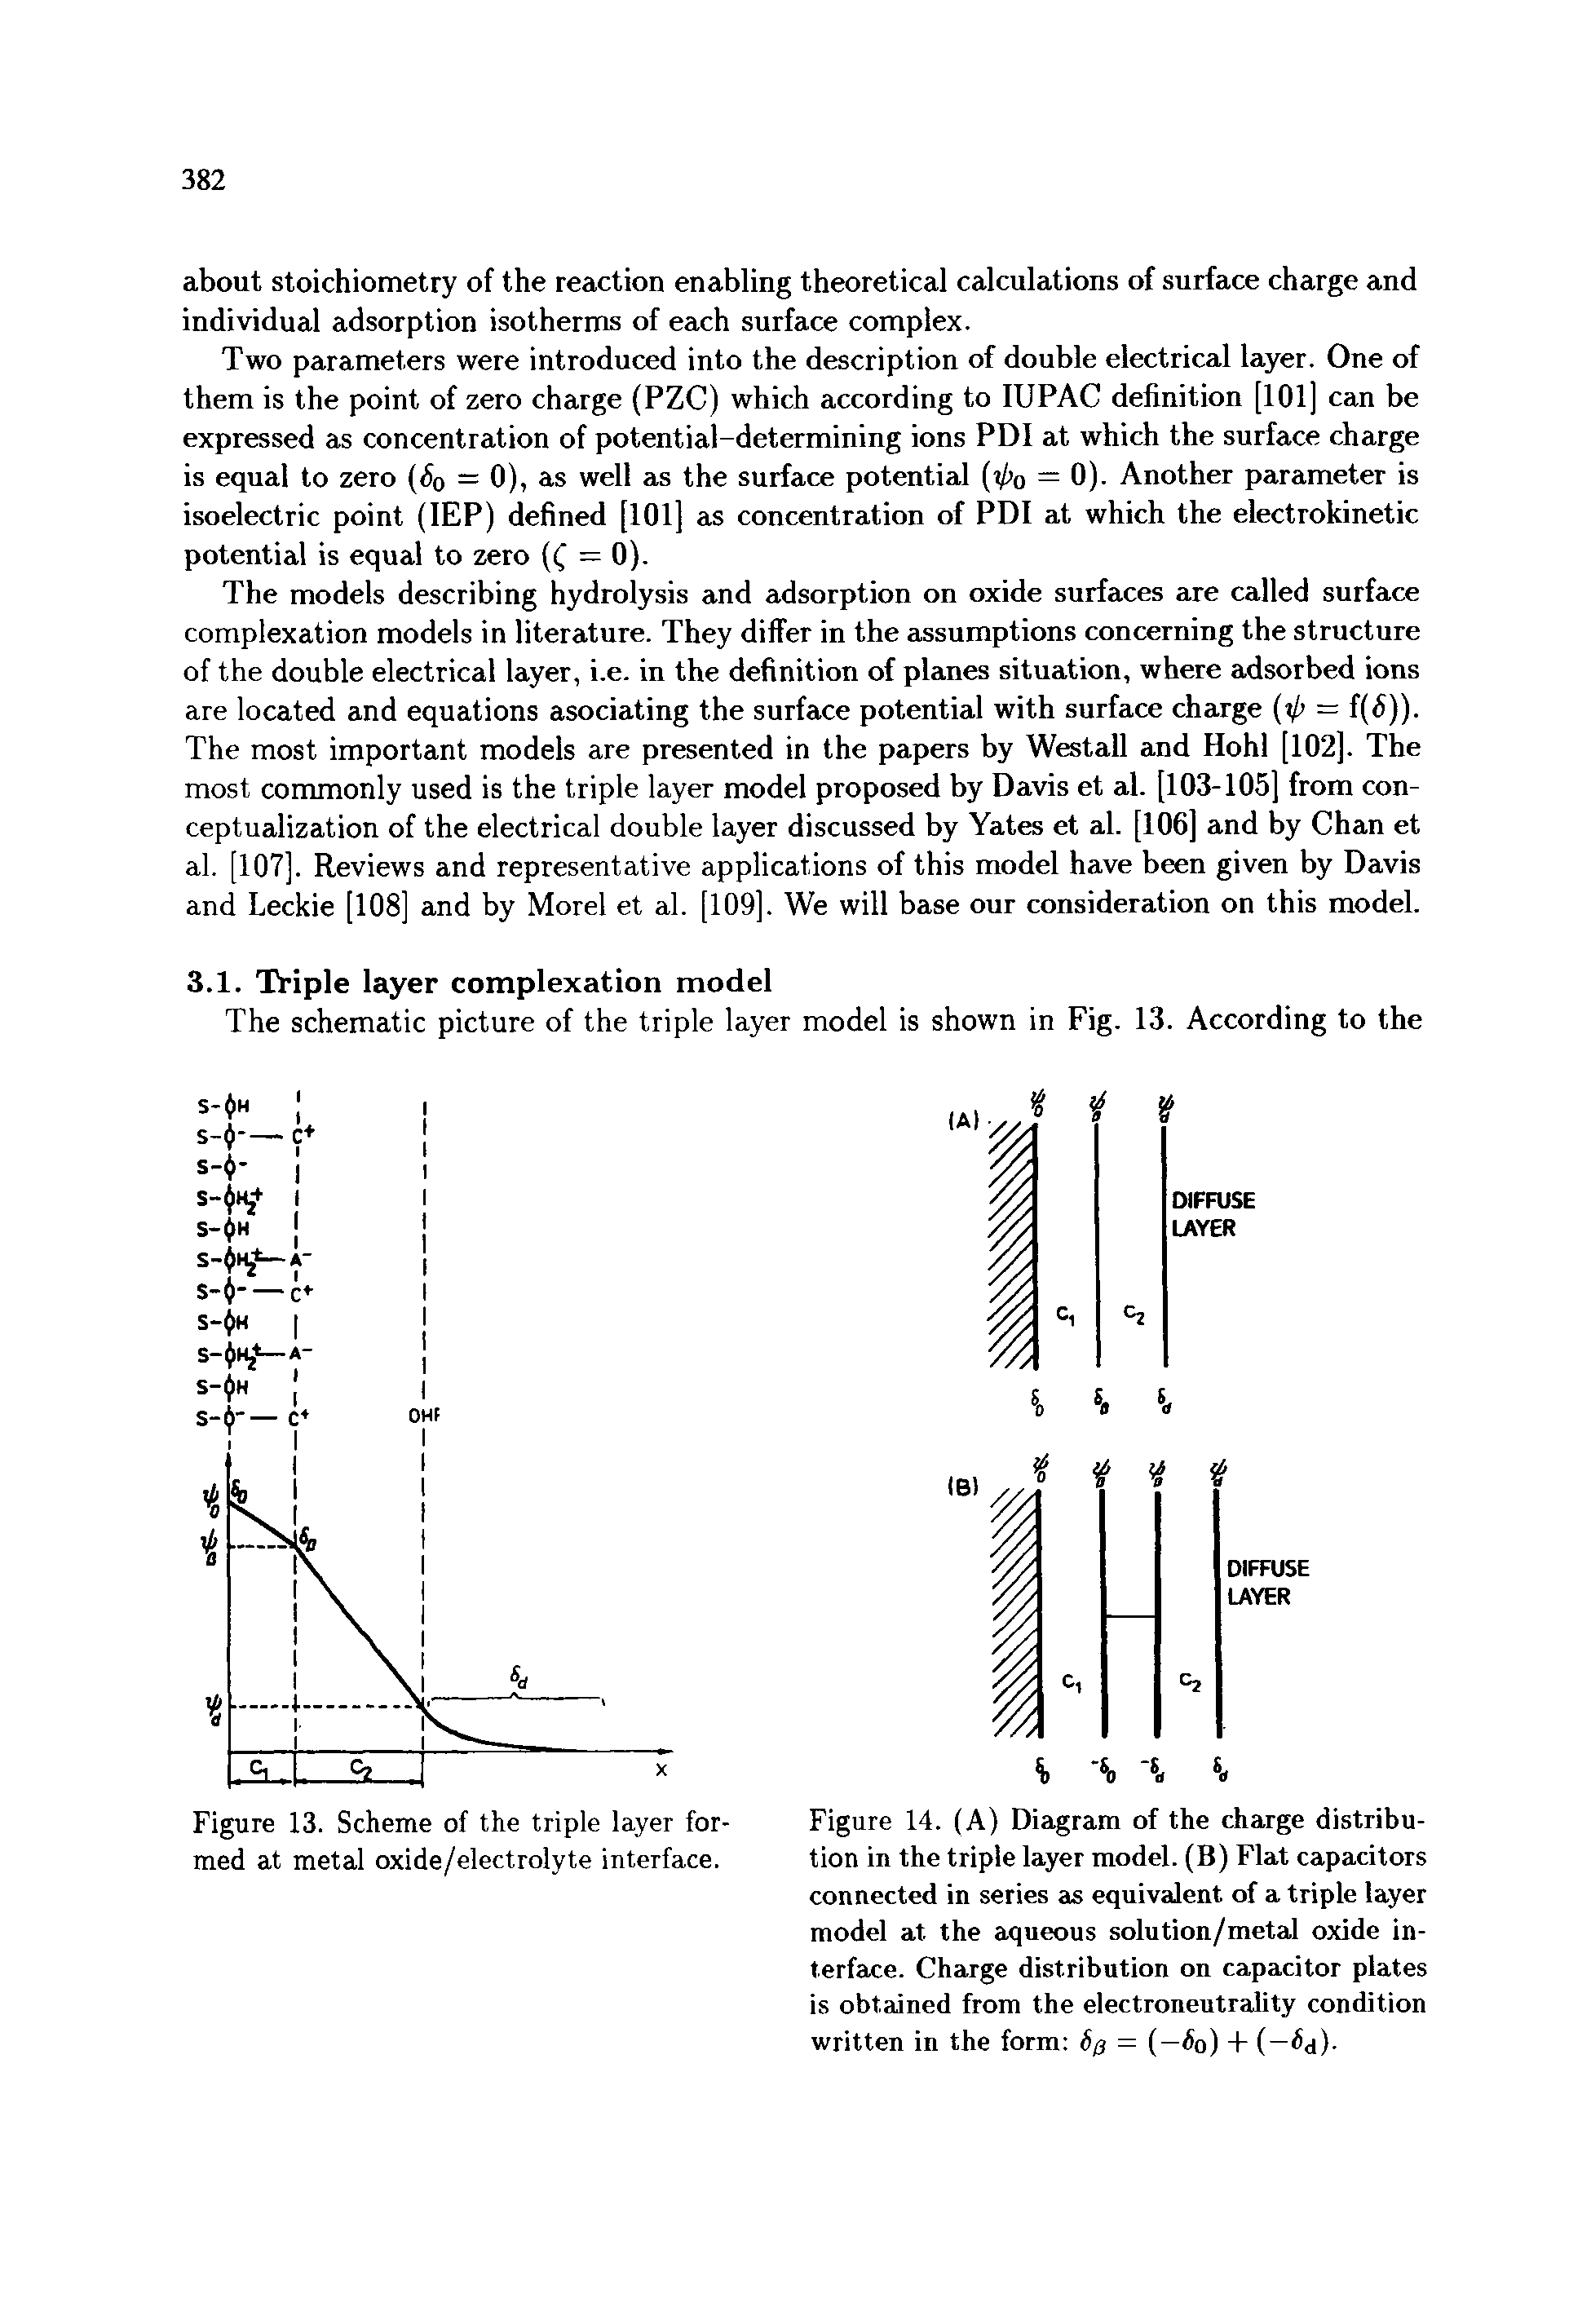 Figure 14. (A) Diagram of the charge distribution in the triple layer model. (B) Flat capacitors connected in series as equivalent of a triple layer model at the aqueous solution/metal oxide interface. Charge distribution on capacitor plates is obtained from the electroneutrality condition written in the form 6g = (— o) + ( d).